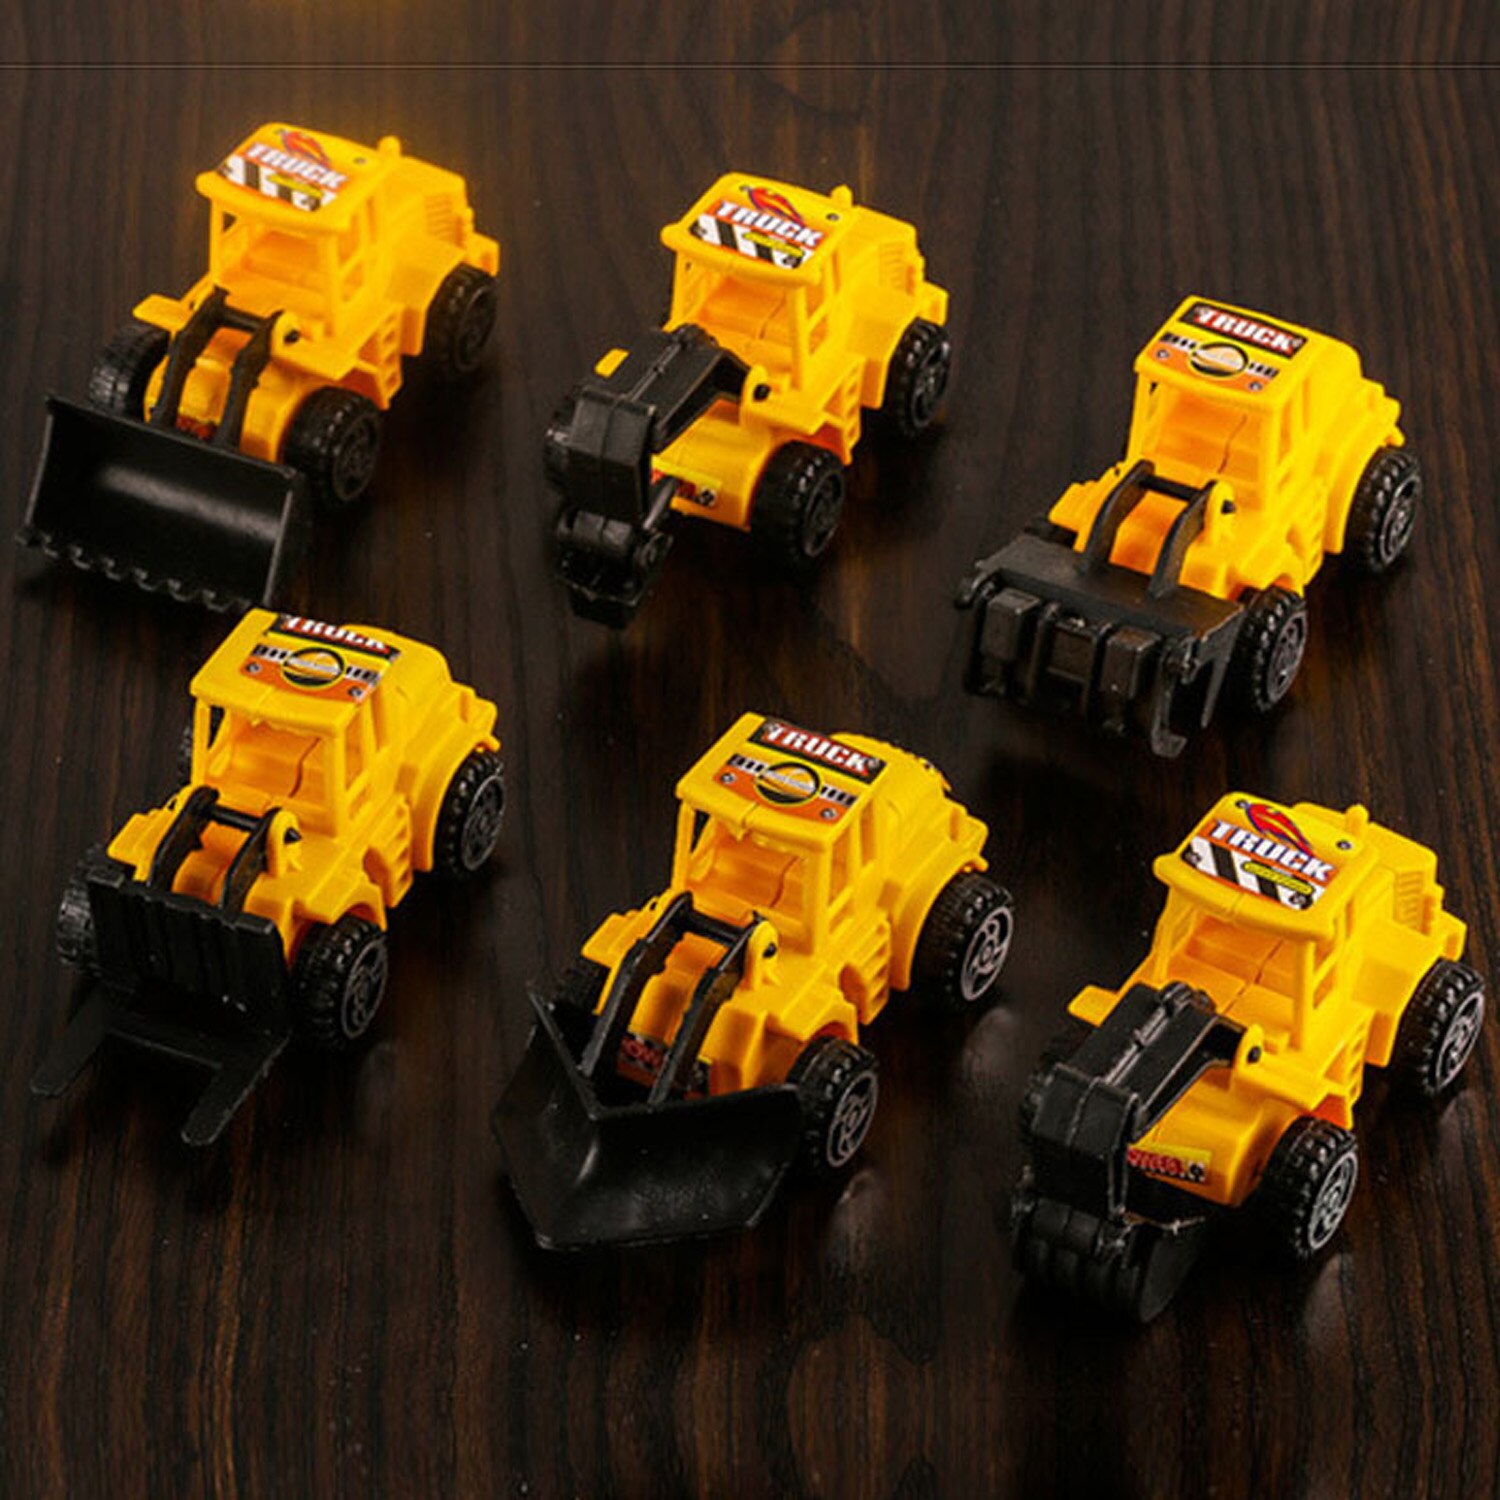 Behogar 5PCS Yellow Engineering Vehicle Cake Decorations for Construction Themed Party Baking Cute Birthday Decorations